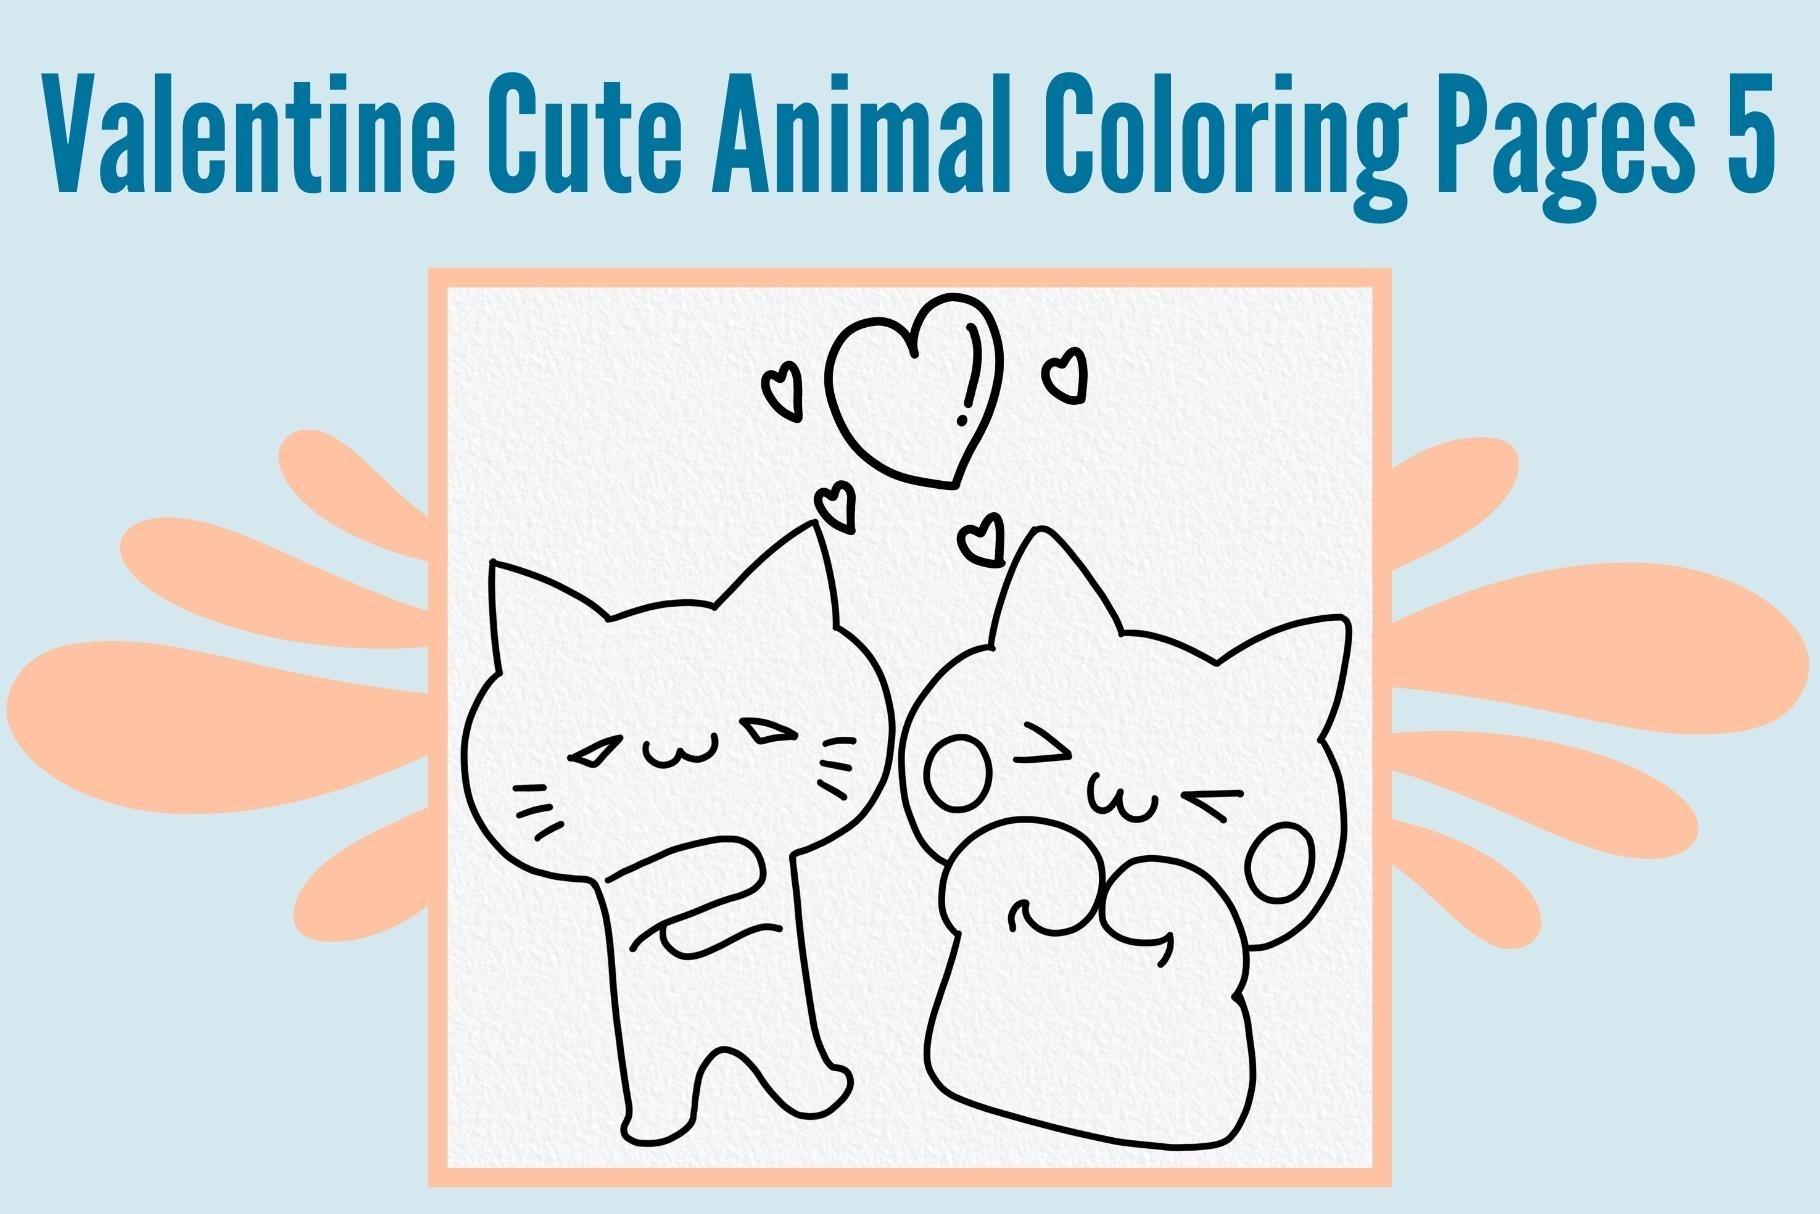 Valentine Cute Animal Coloring Pages 5